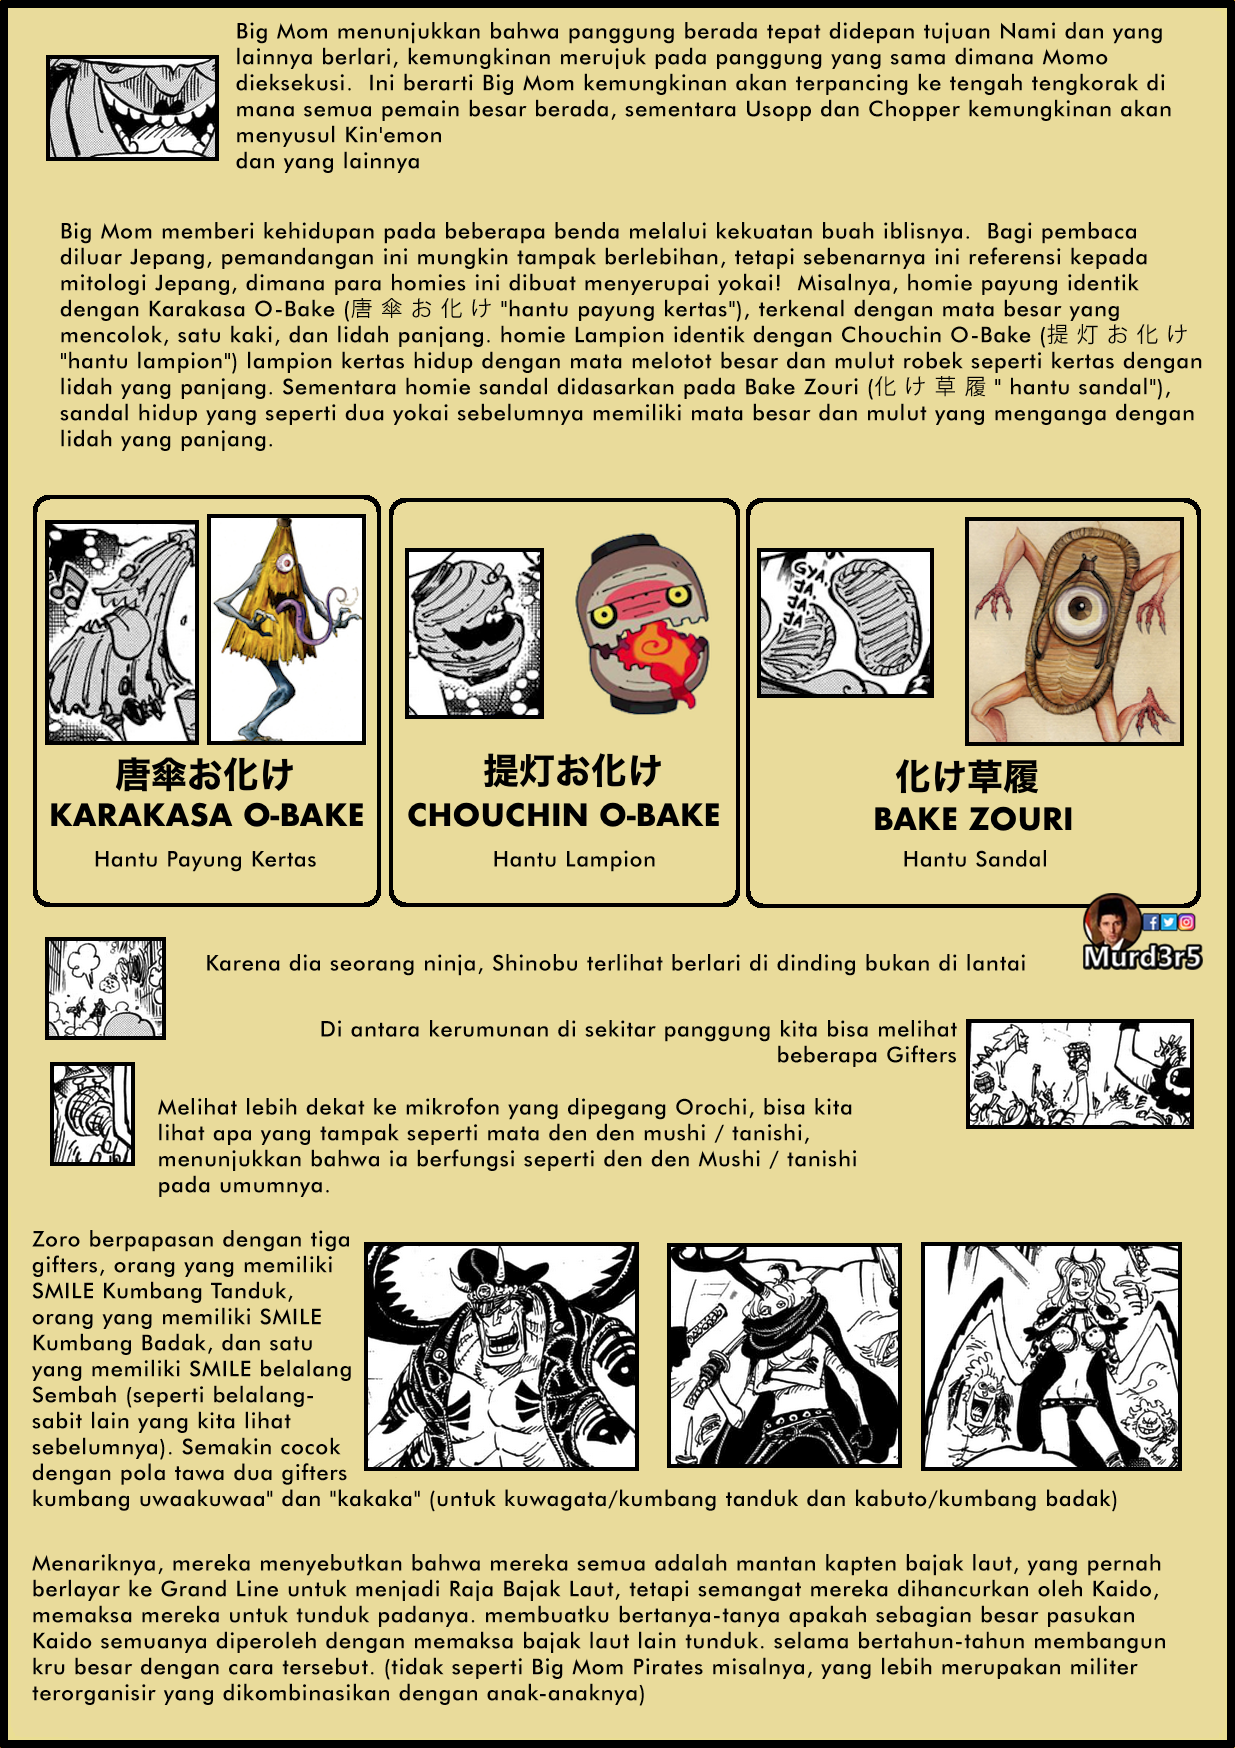 one-piece-chapter-983-analysis-2